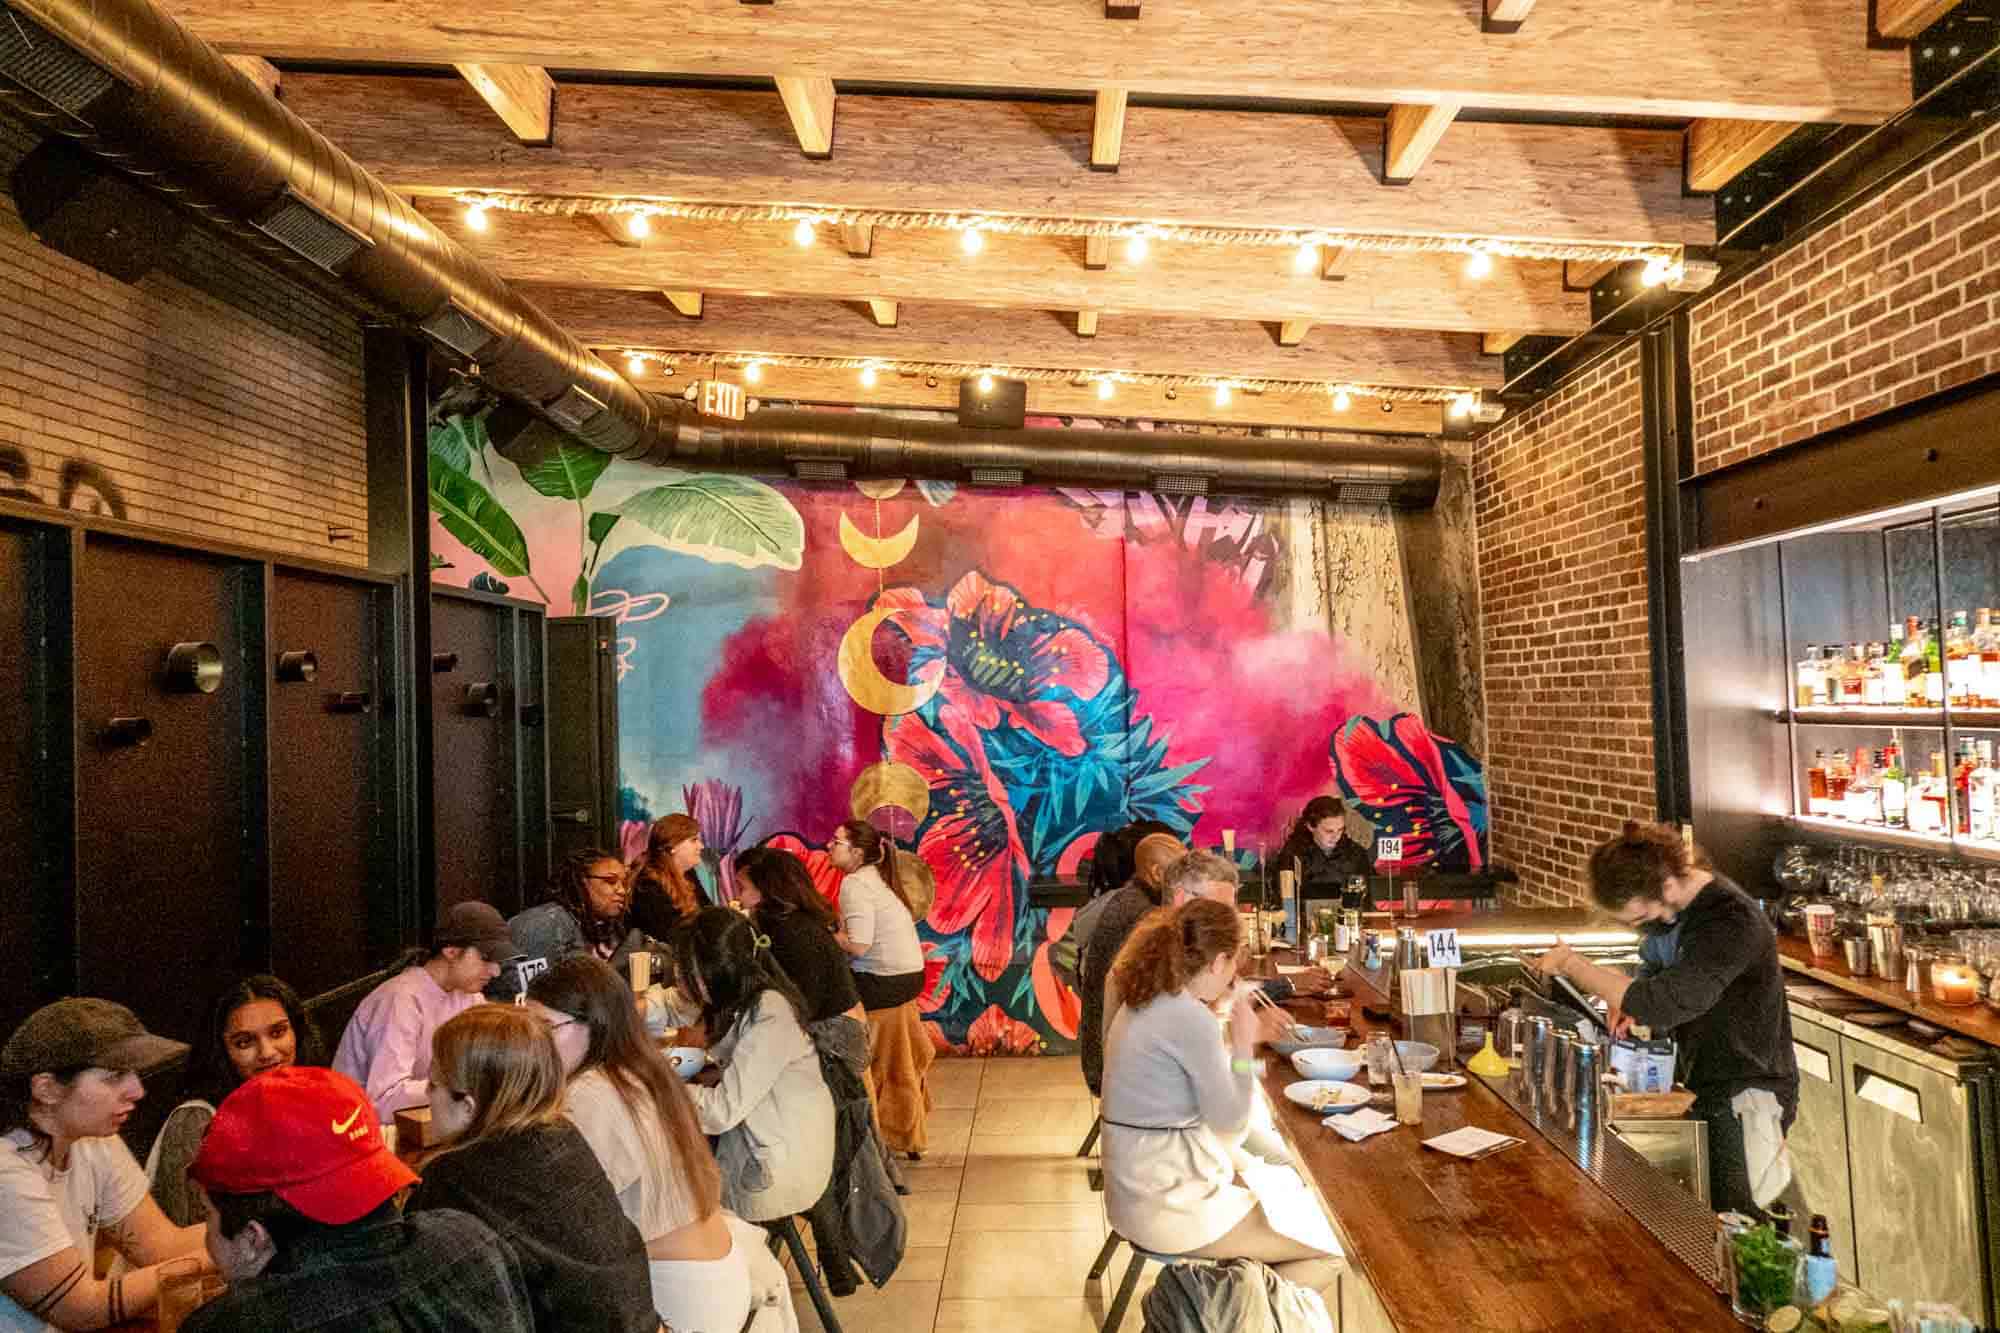 People in Graffiti Bar with a bright, painted wall mural